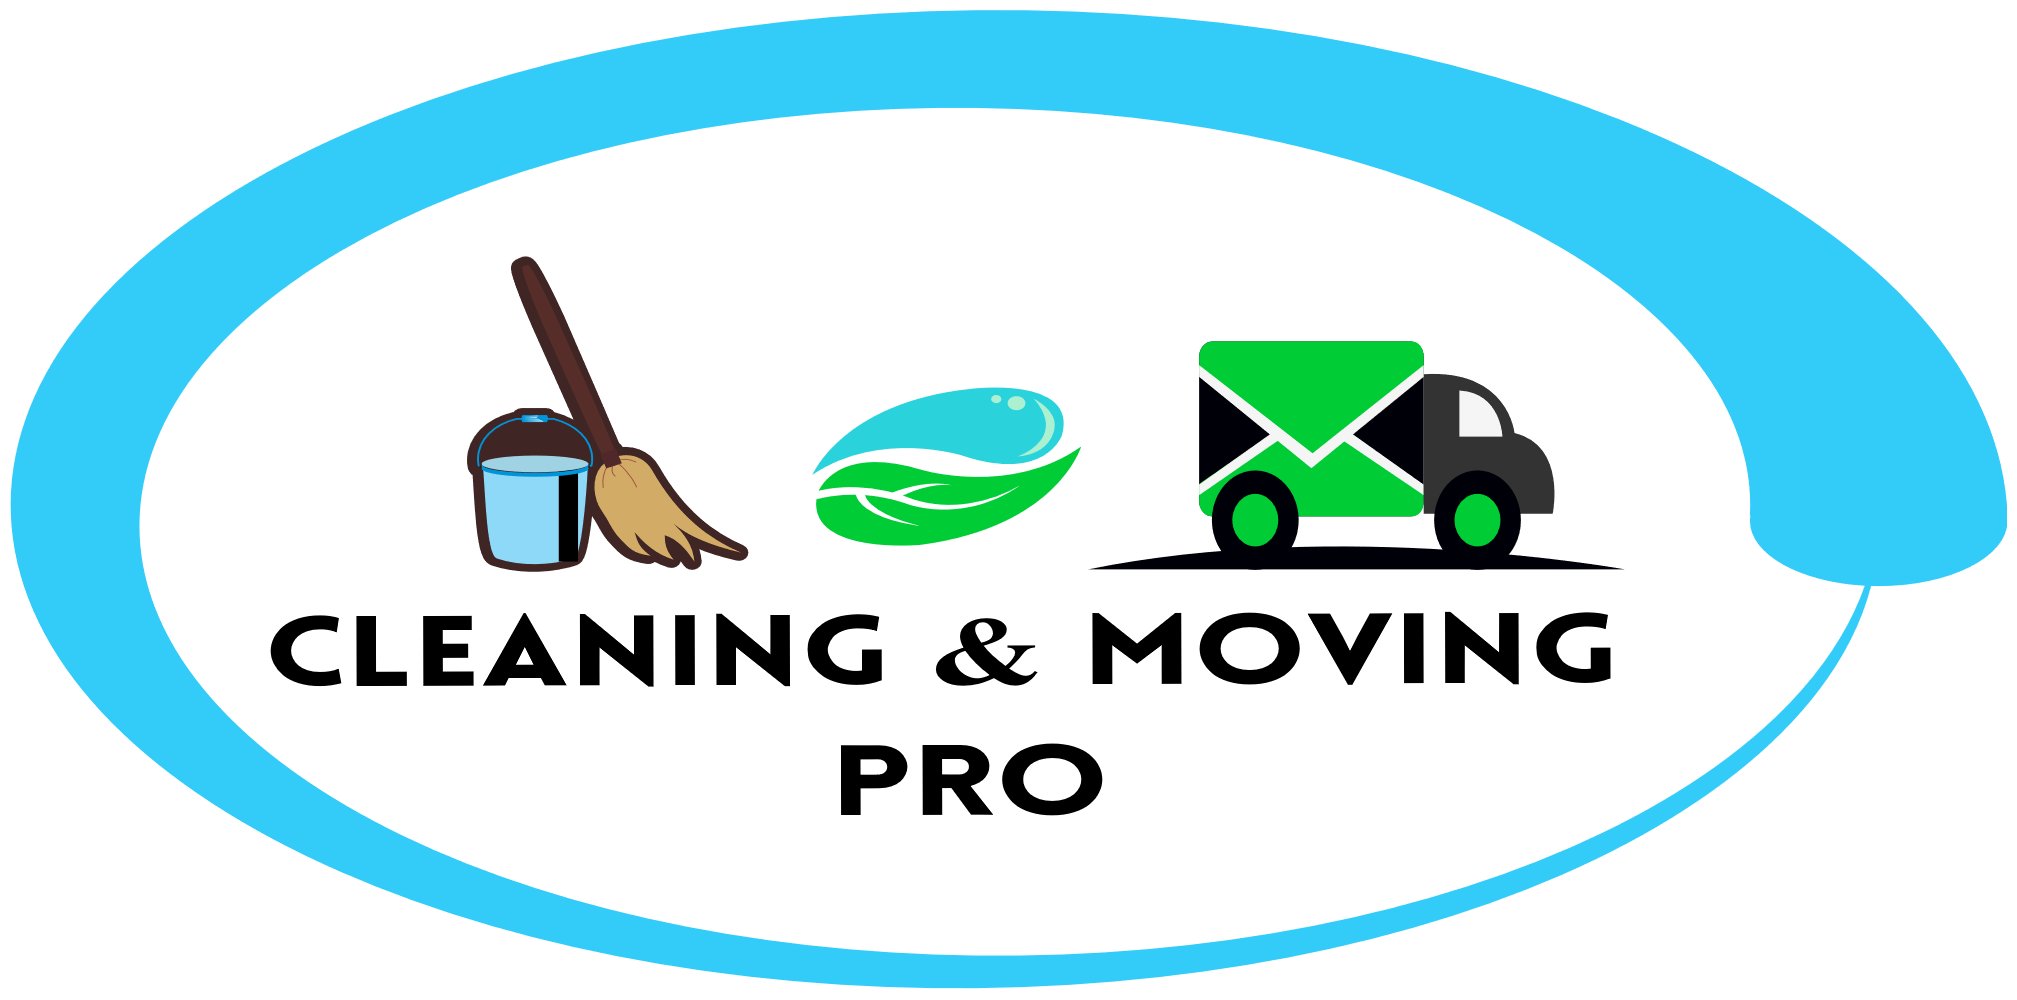 We provides after builders cleaning services in Galway and Dublin region, which will get the newly constructed building or a home remodel in pristine condition.-CLEANING AND MOVING PRO